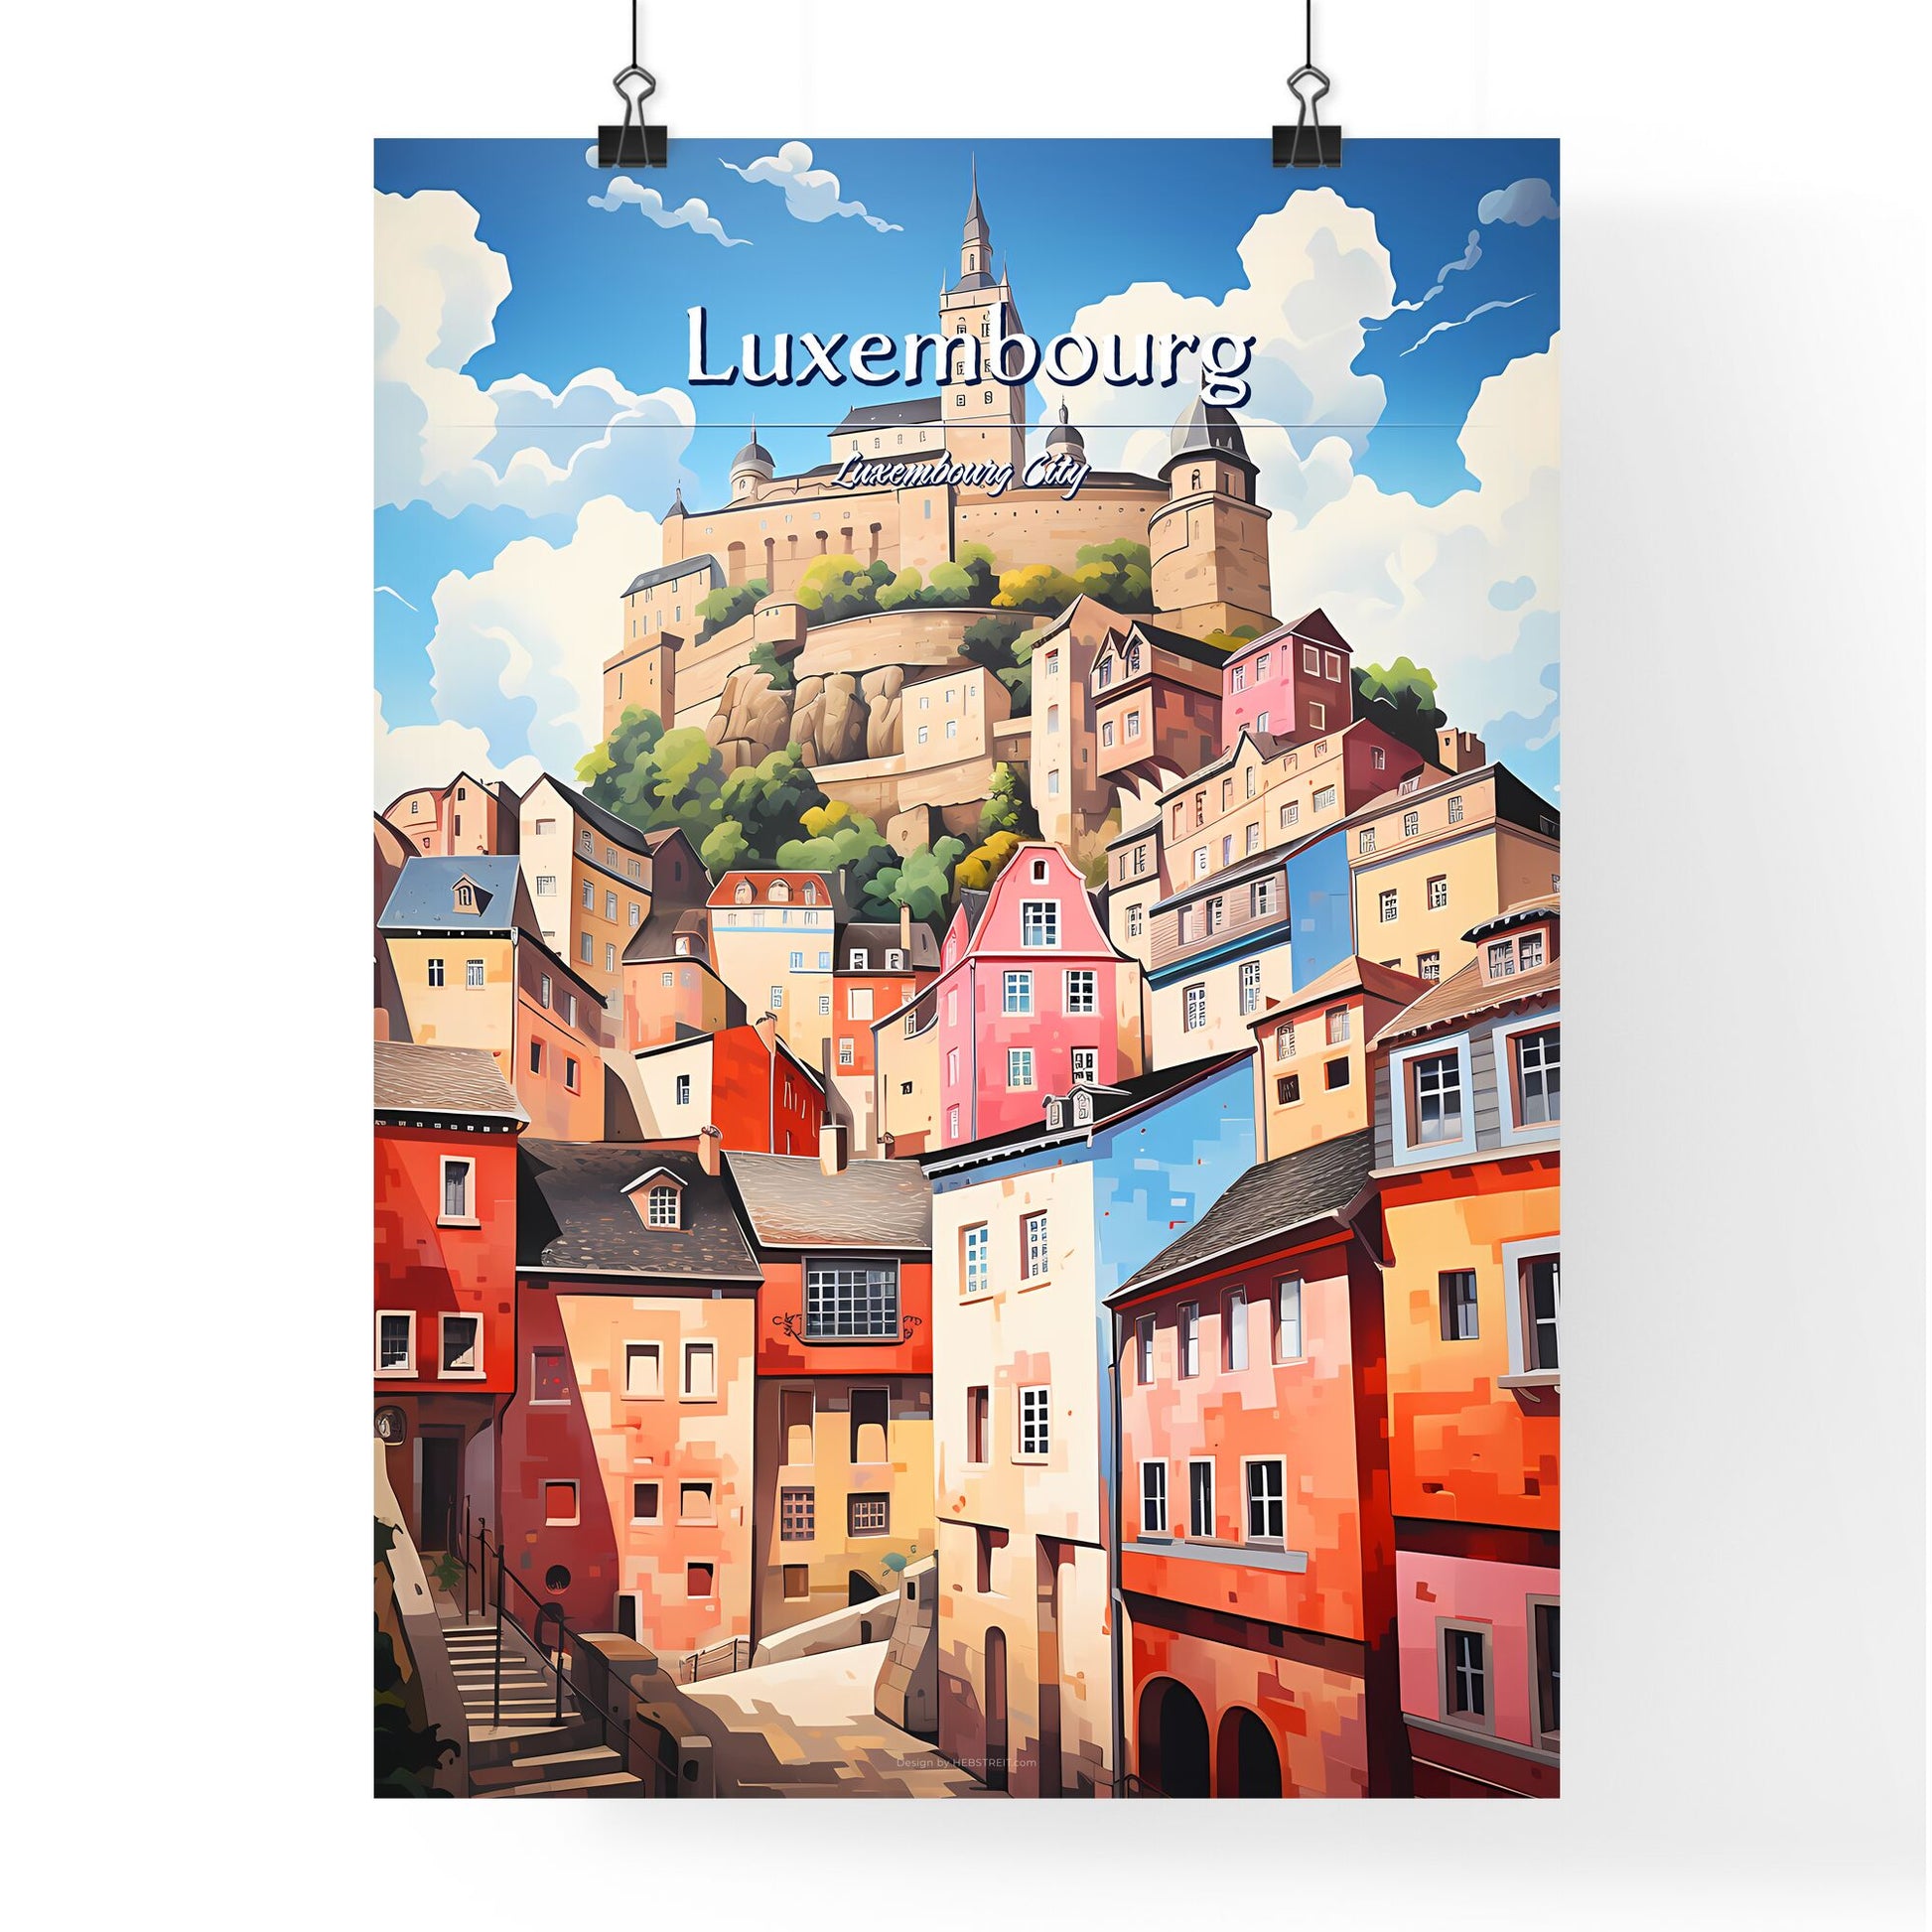 Luxembourg City, Luxembourg - Art print of a colorful buildings with a castle on a hill Default Title